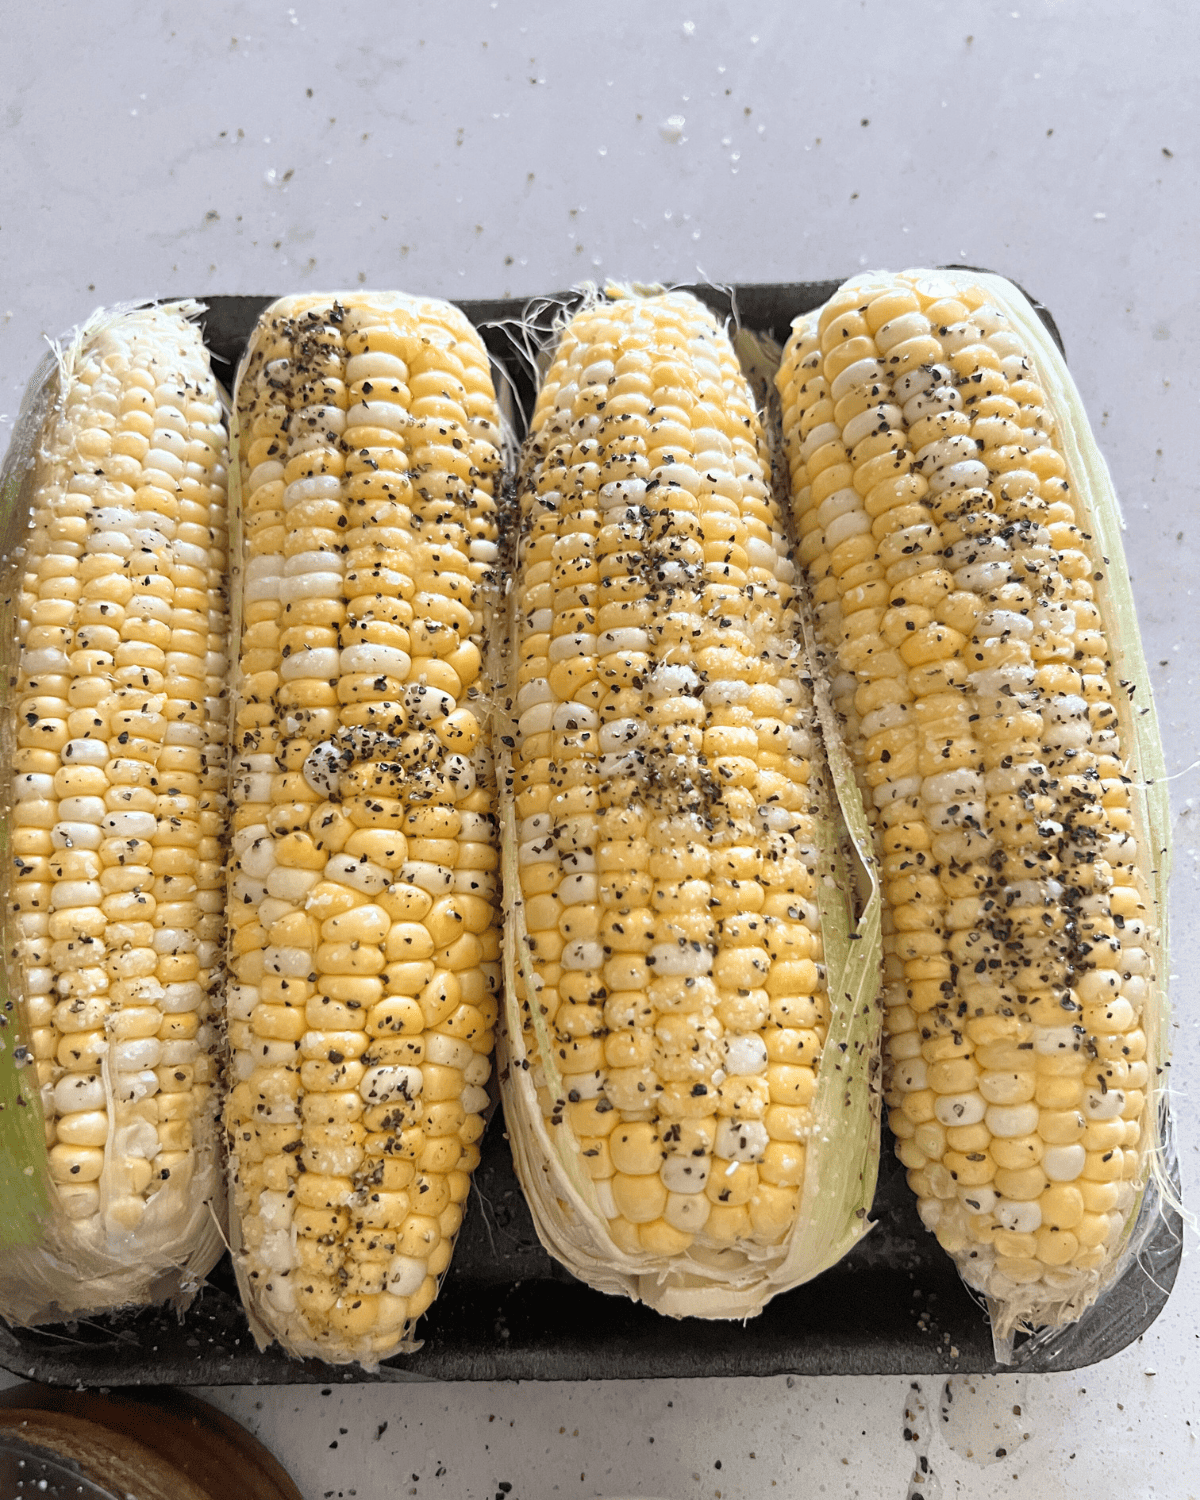 corn on the cob seasoned with just salt and pepper.